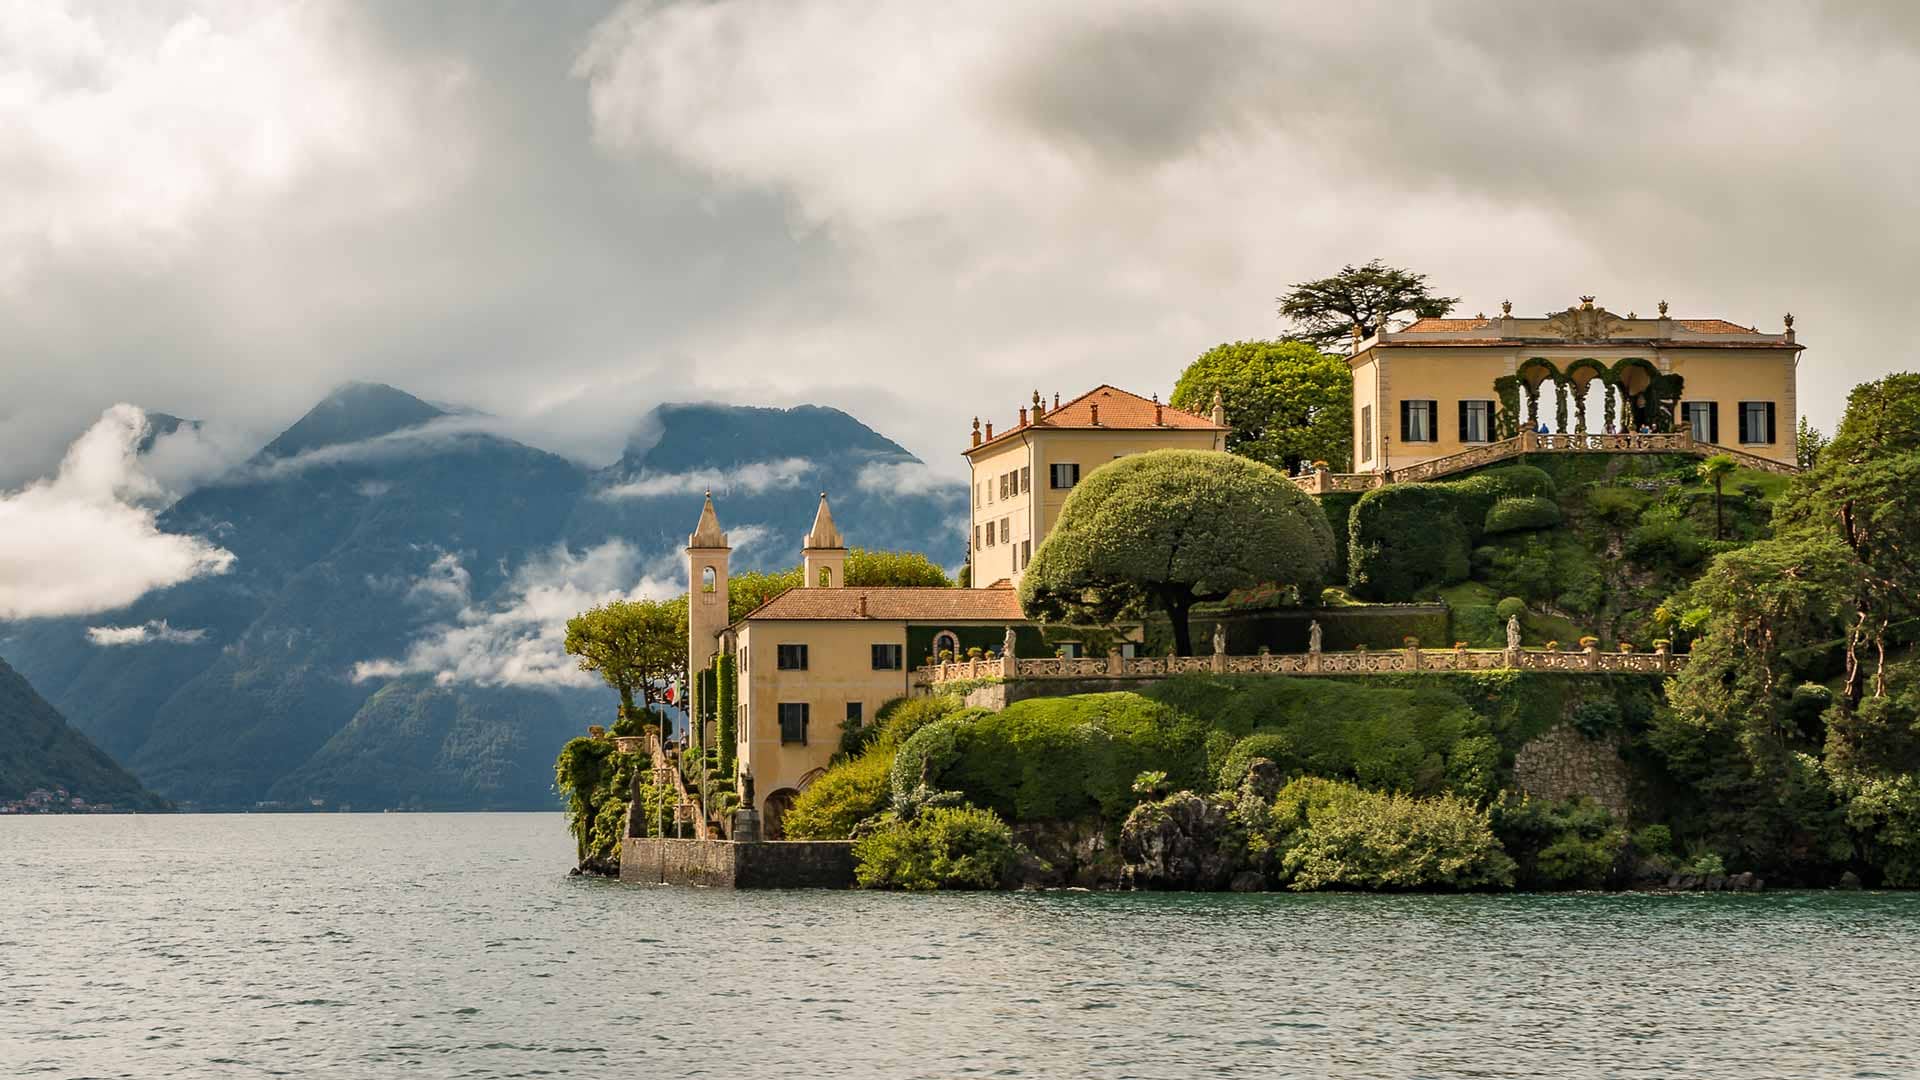 A Complete Guide On Lake Como Star Wars - HOPE MAGZINE